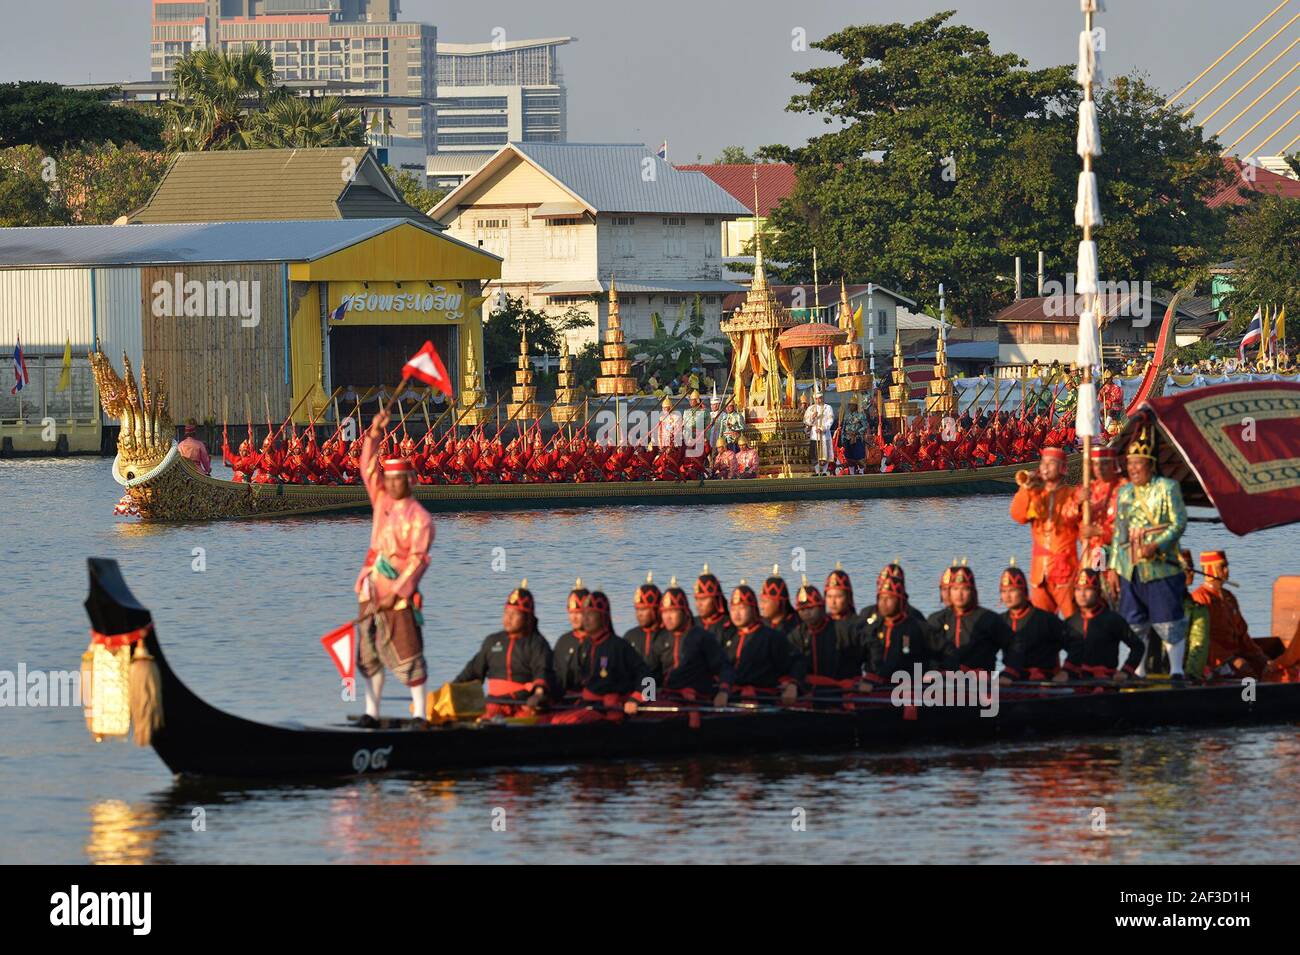 Bangkok. 12th Dec, 2019. Photo taken on Dec. 12, 2019 shows a view of the royal barge procession along the Chao Phraya River in Bangkok, Thailand. A spectacular royal barge procession which graced through Bangkok's main river on Thursday marked the completion of the royal coronation ceremony for King Vajiralongkorn. Credit: Rachen Sageamsak/Xinhua/Alamy Live News Stock Photo